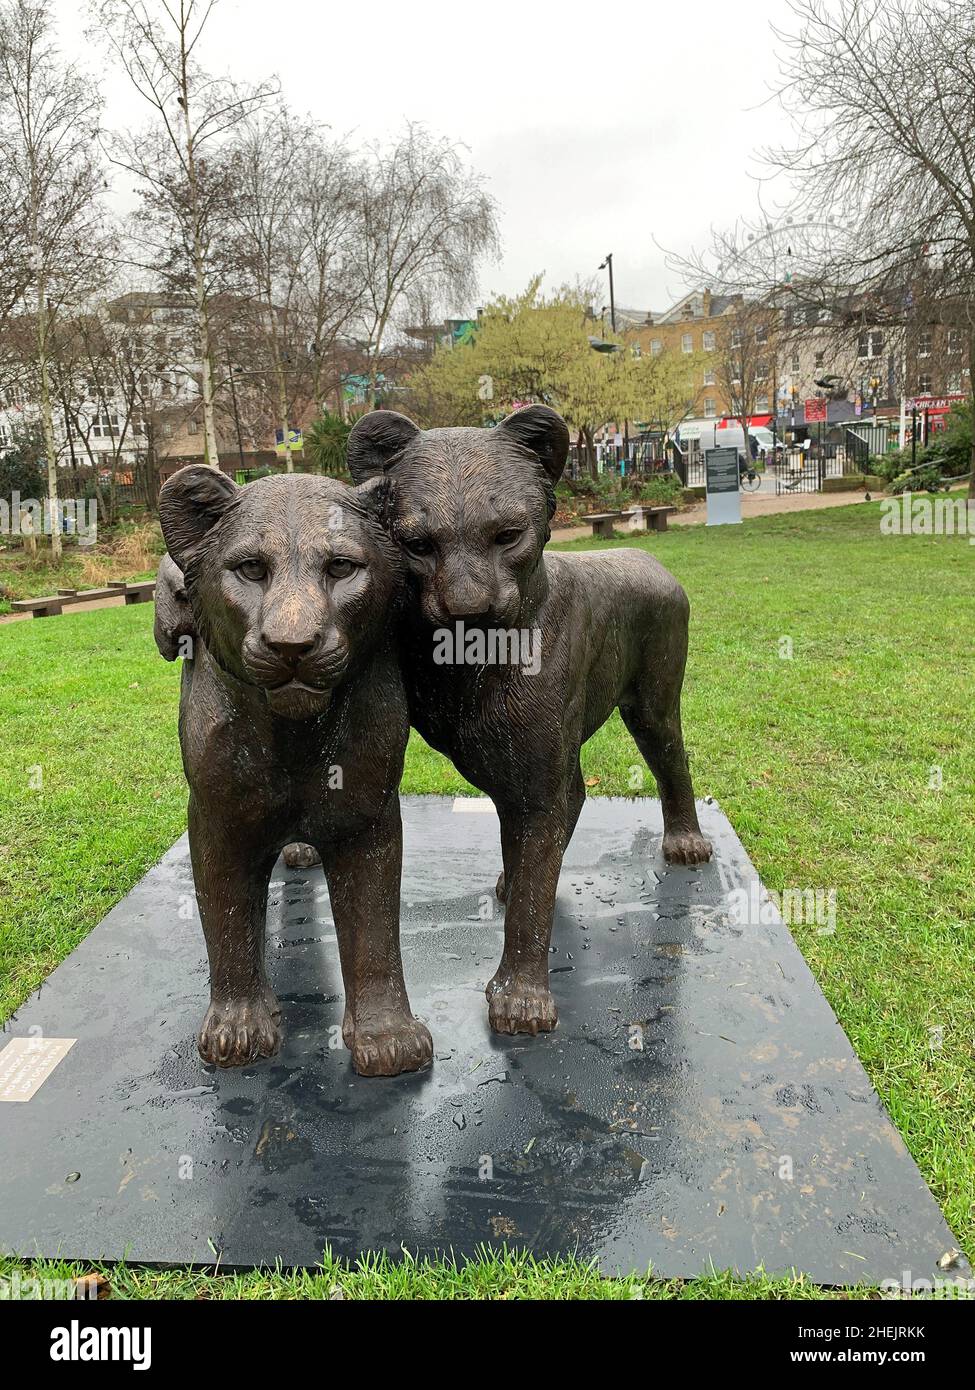 Waterloo, London 2022. Born Free Foundation and Artists Gillie and Marc have put on an axhibition with sculptures of playful lion cubs to raise awaren Stock Photo